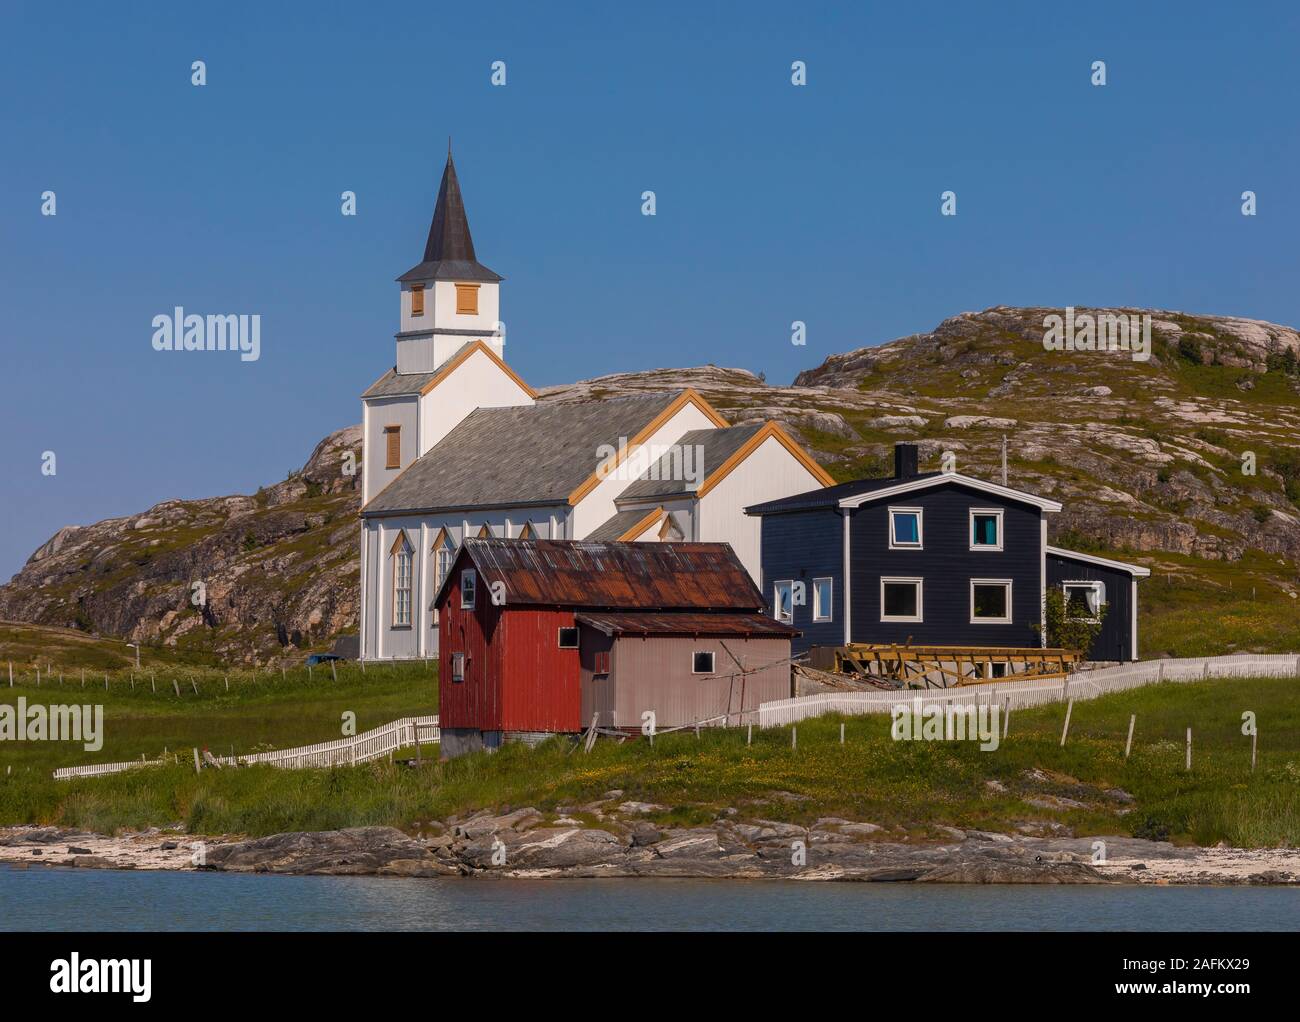 HILLESØY, TROMS COUNTY, NORWAY - Hillesøy Church in northern Norway. Stock Photo